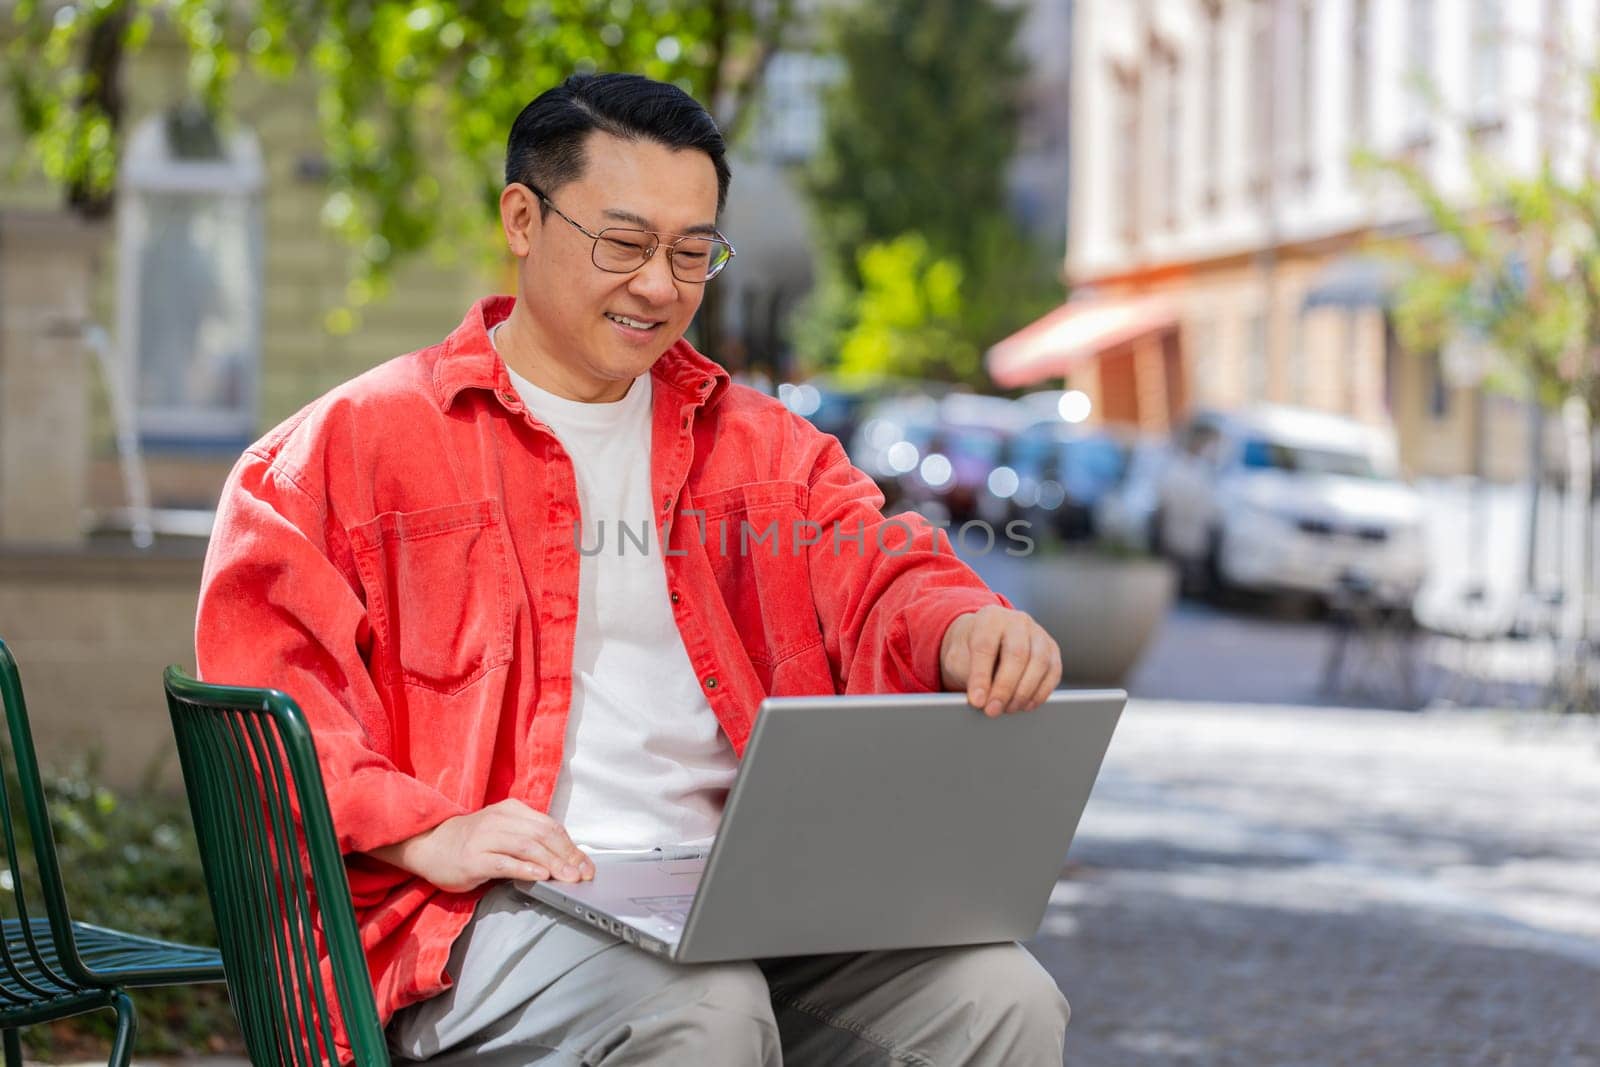 Asian middle-aged man freelancer working online distant job with laptop browsing website chatting sitting outdoors. Chinese guy on city street looking at notebook screen send messages watching movies